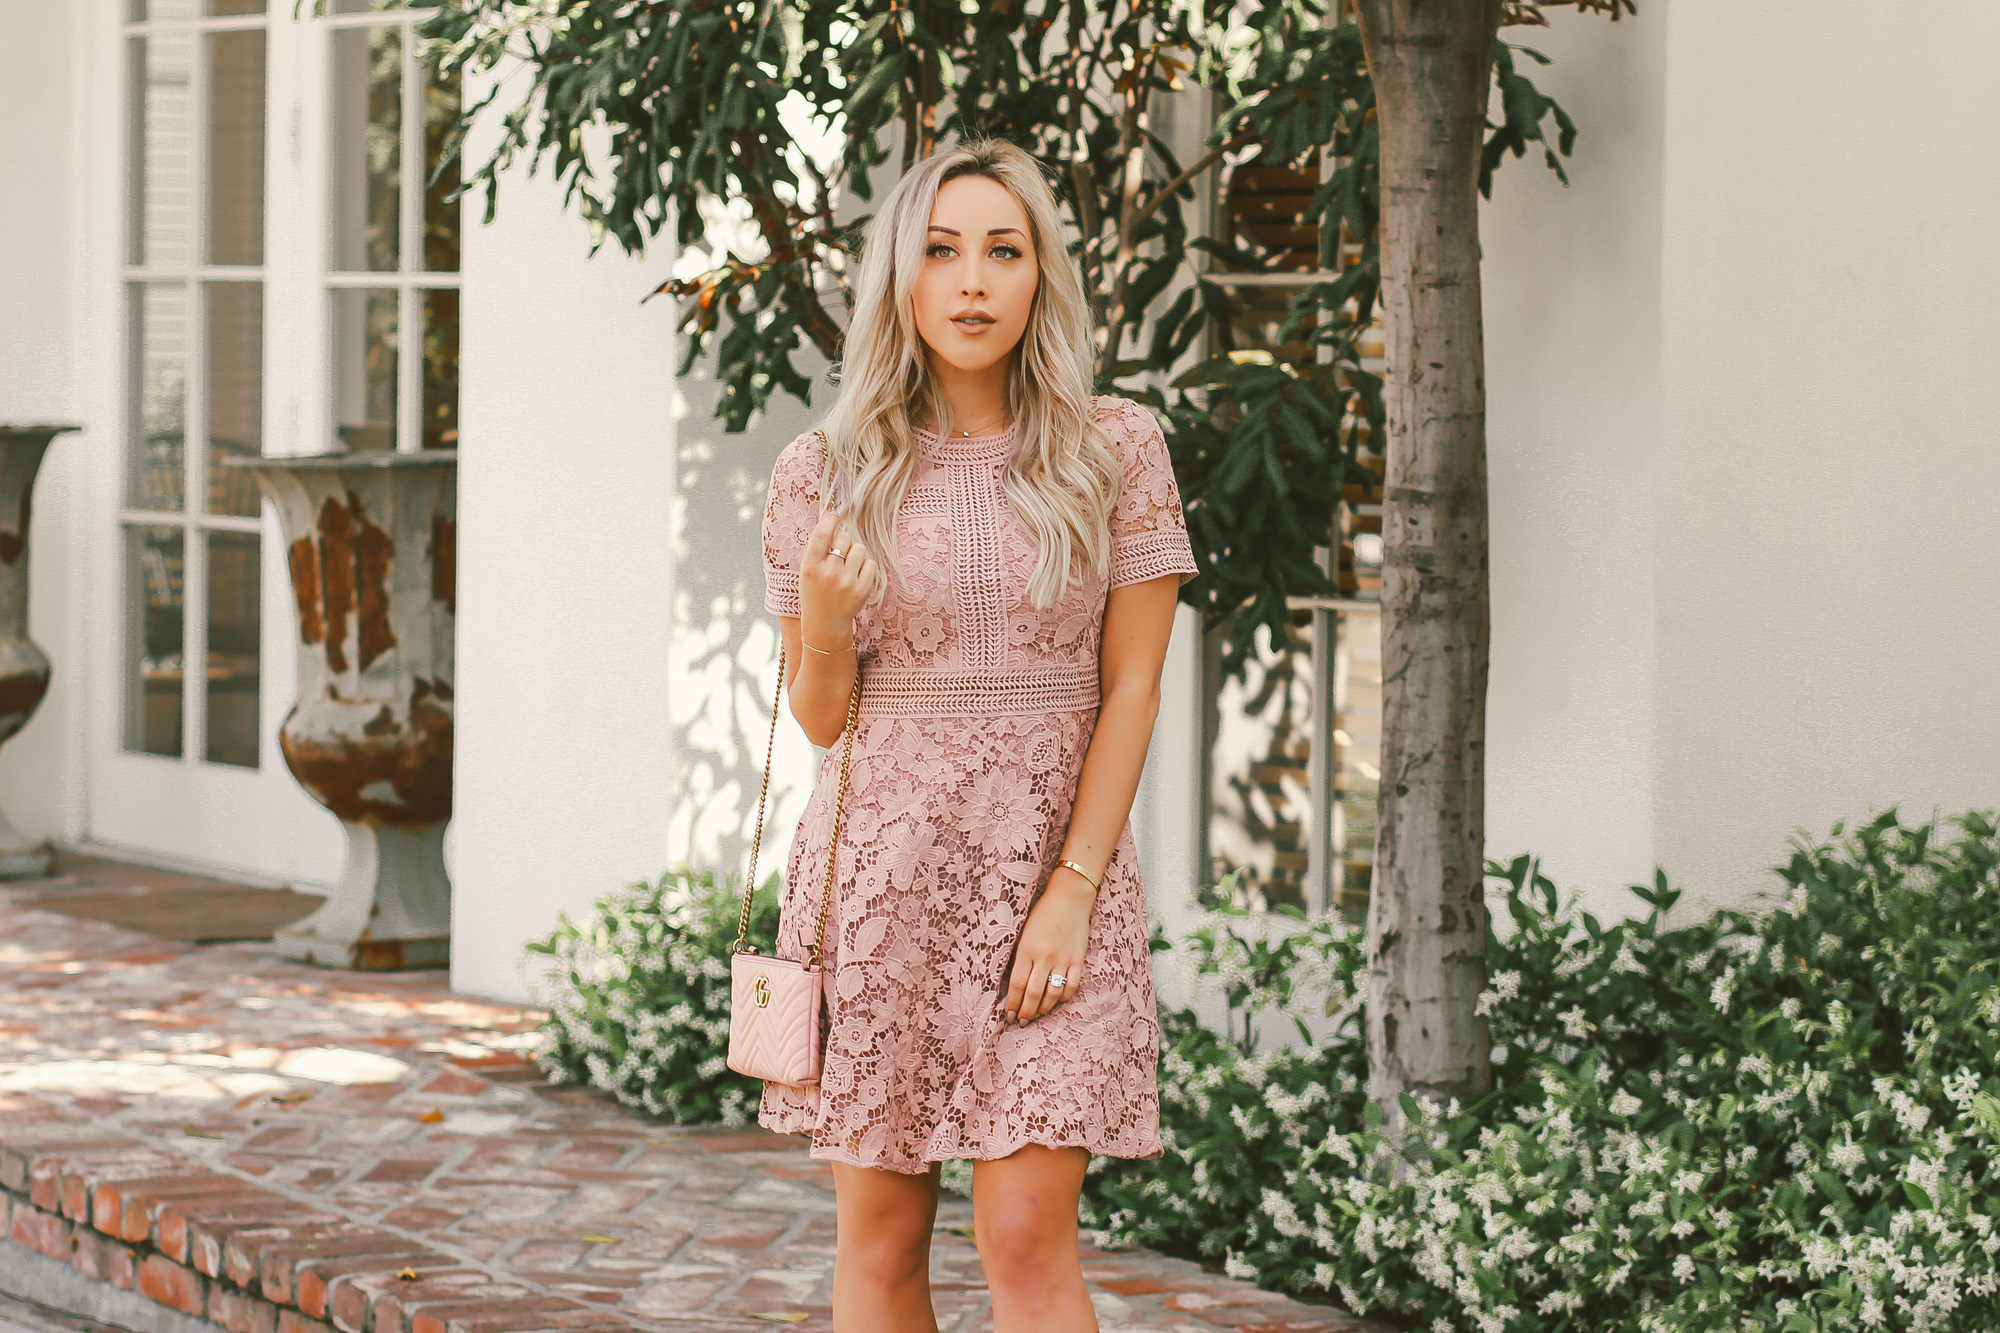 Mother's Day Outfit Inspo | Spring Outfit Inspo | Spring Fashion | Pink Crochet Dress | Blondie in the City by Hayley Larue